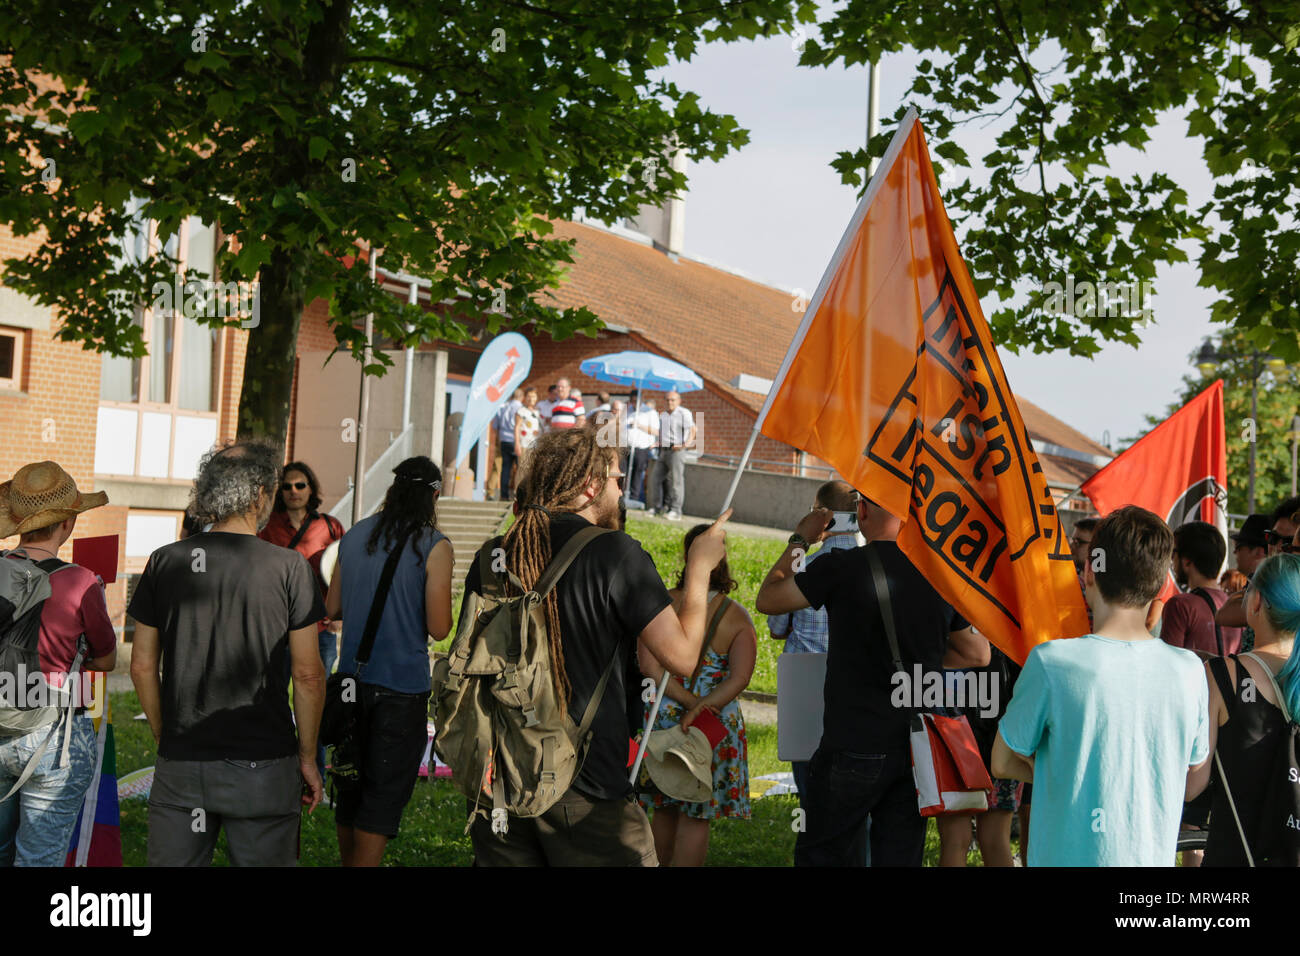 Jockgrim, Germany. 26th May, 2018. Protesters stand outside the venue with banners posters and flags. The parliamentary group of the right-wing populist AfD (Alternative for Germany) party of Rhineland-Palatinate celebrated the 2nd anniversary of their entry into the Rhineland-Palatinate state parliament in the 2016 state election in the South Palatinate city of Jockgrim. A counter-protest was organised by several groups outside the venue. Credit: Michael Debets/Pacific Pres/Alamy Live News Stock Photo